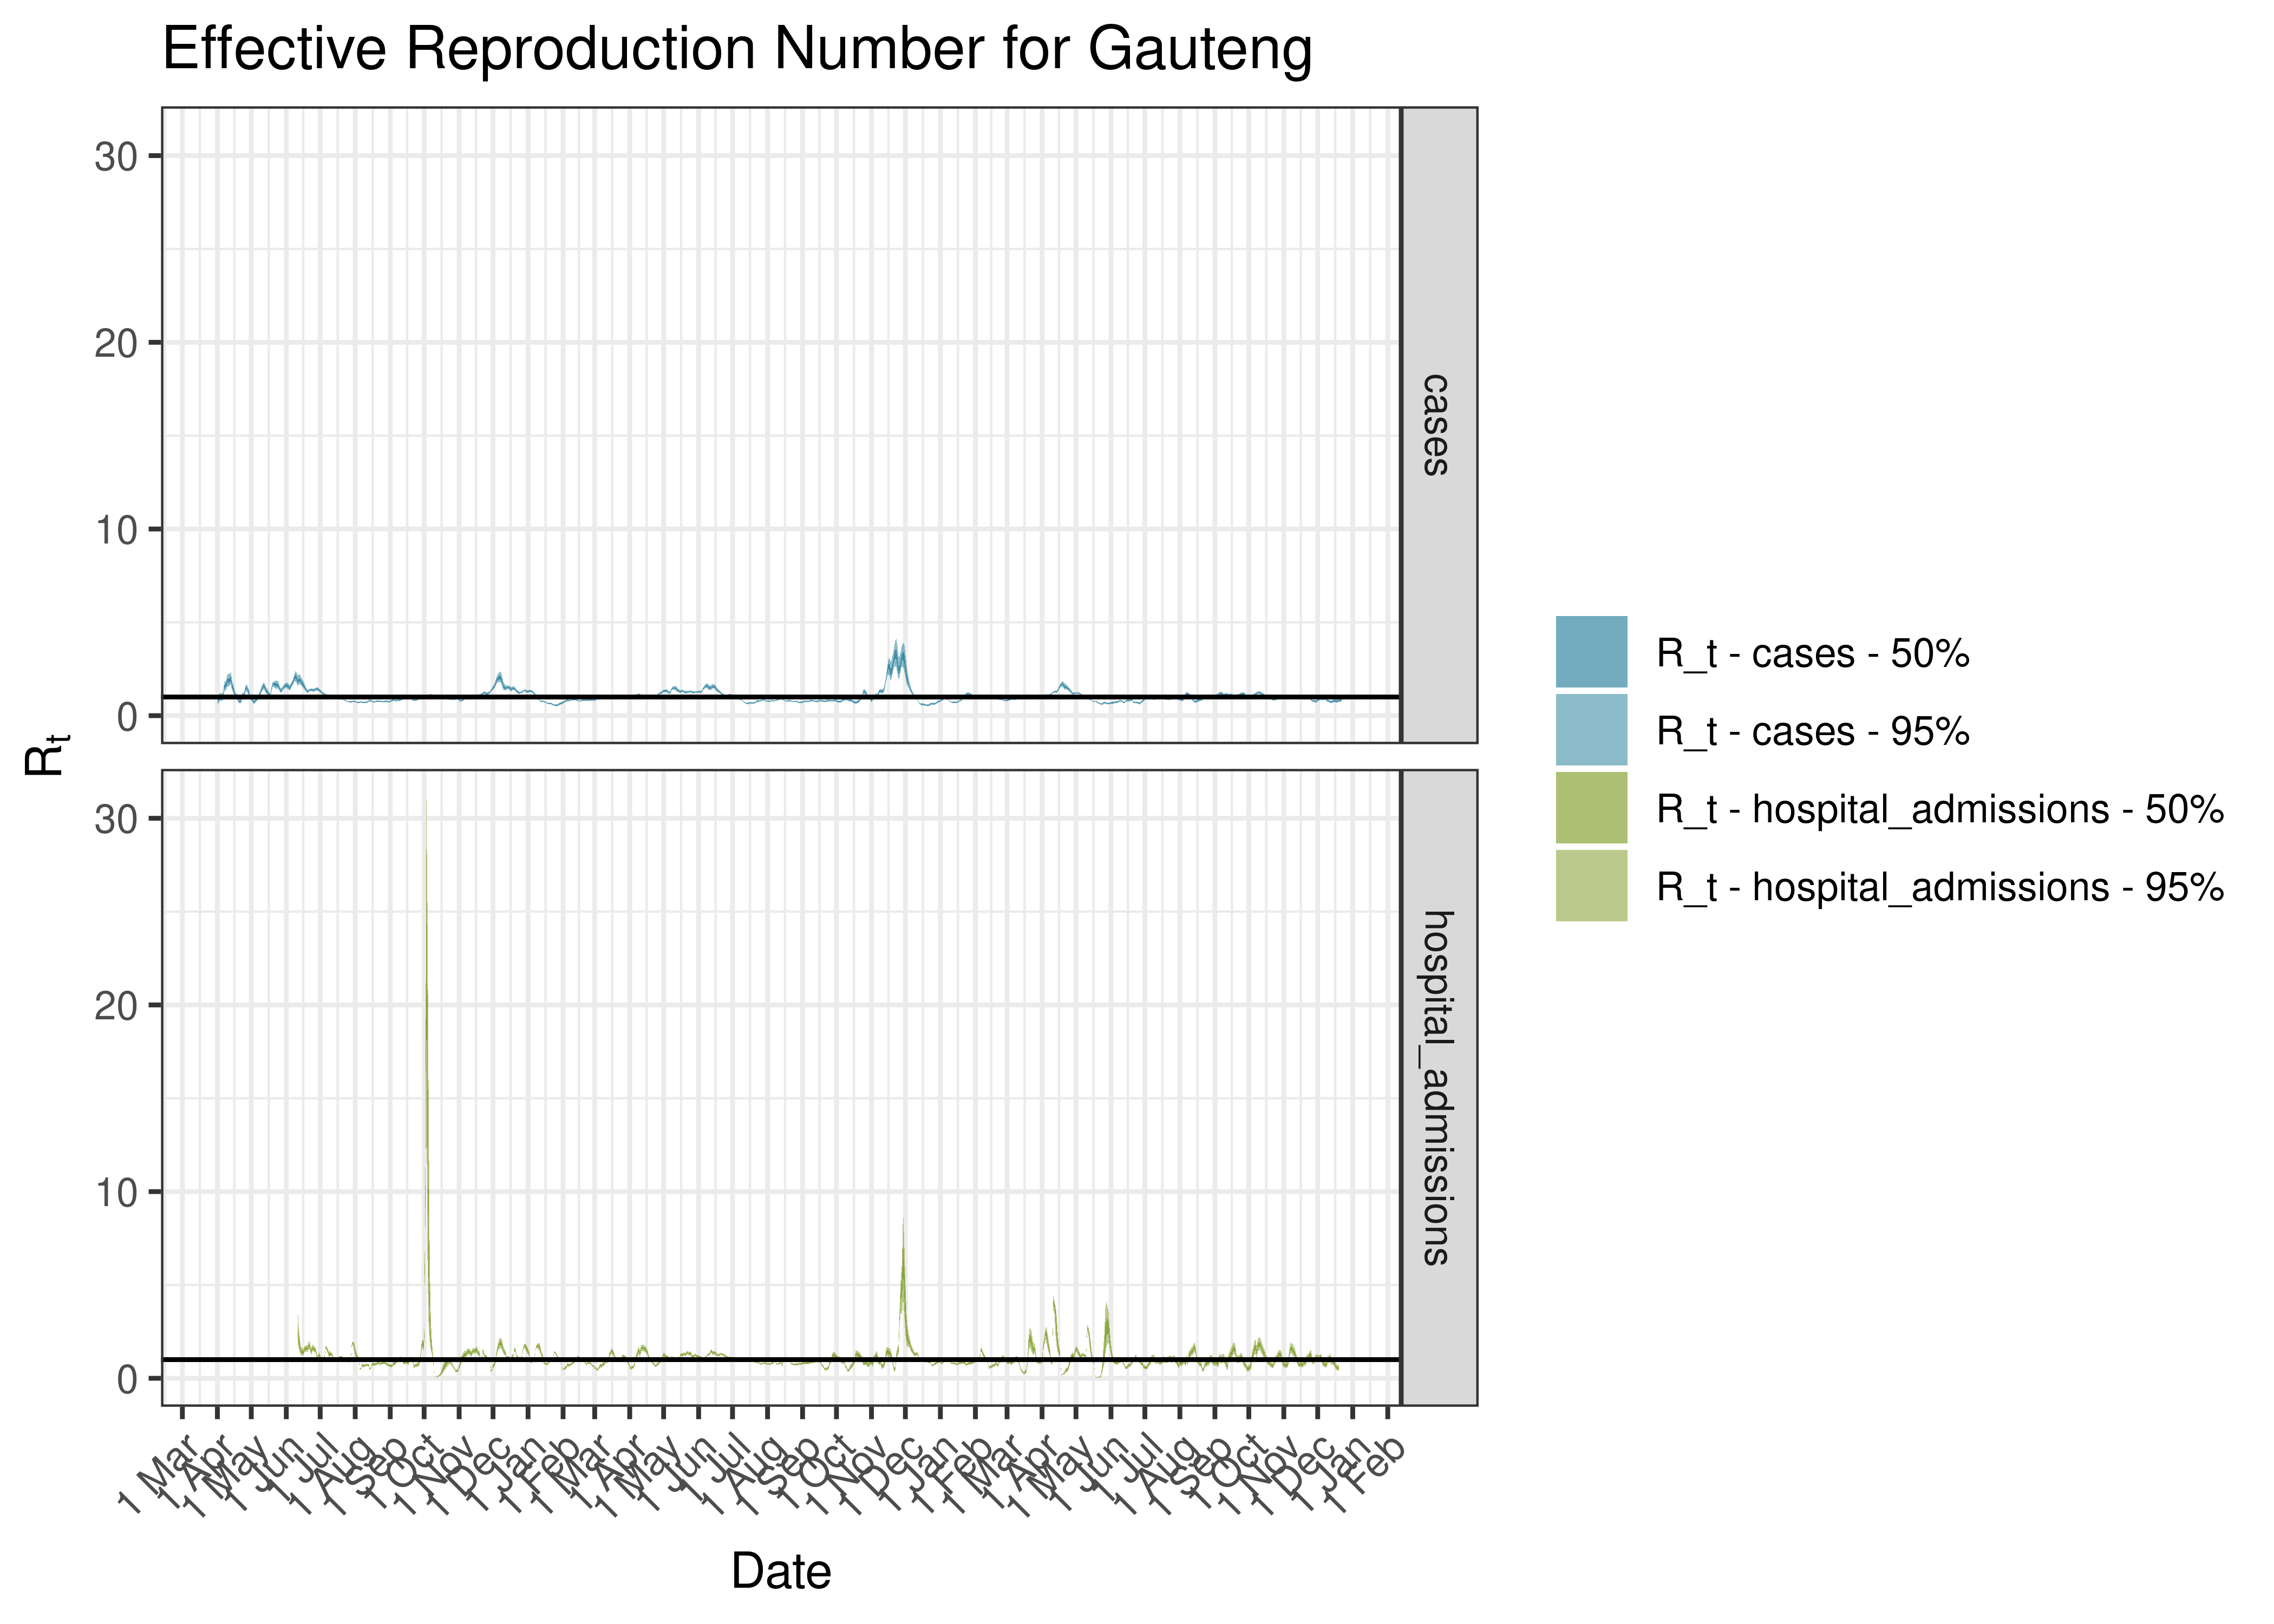 Estimated Effective Reproduction Number for Gauteng since 1 April 2020